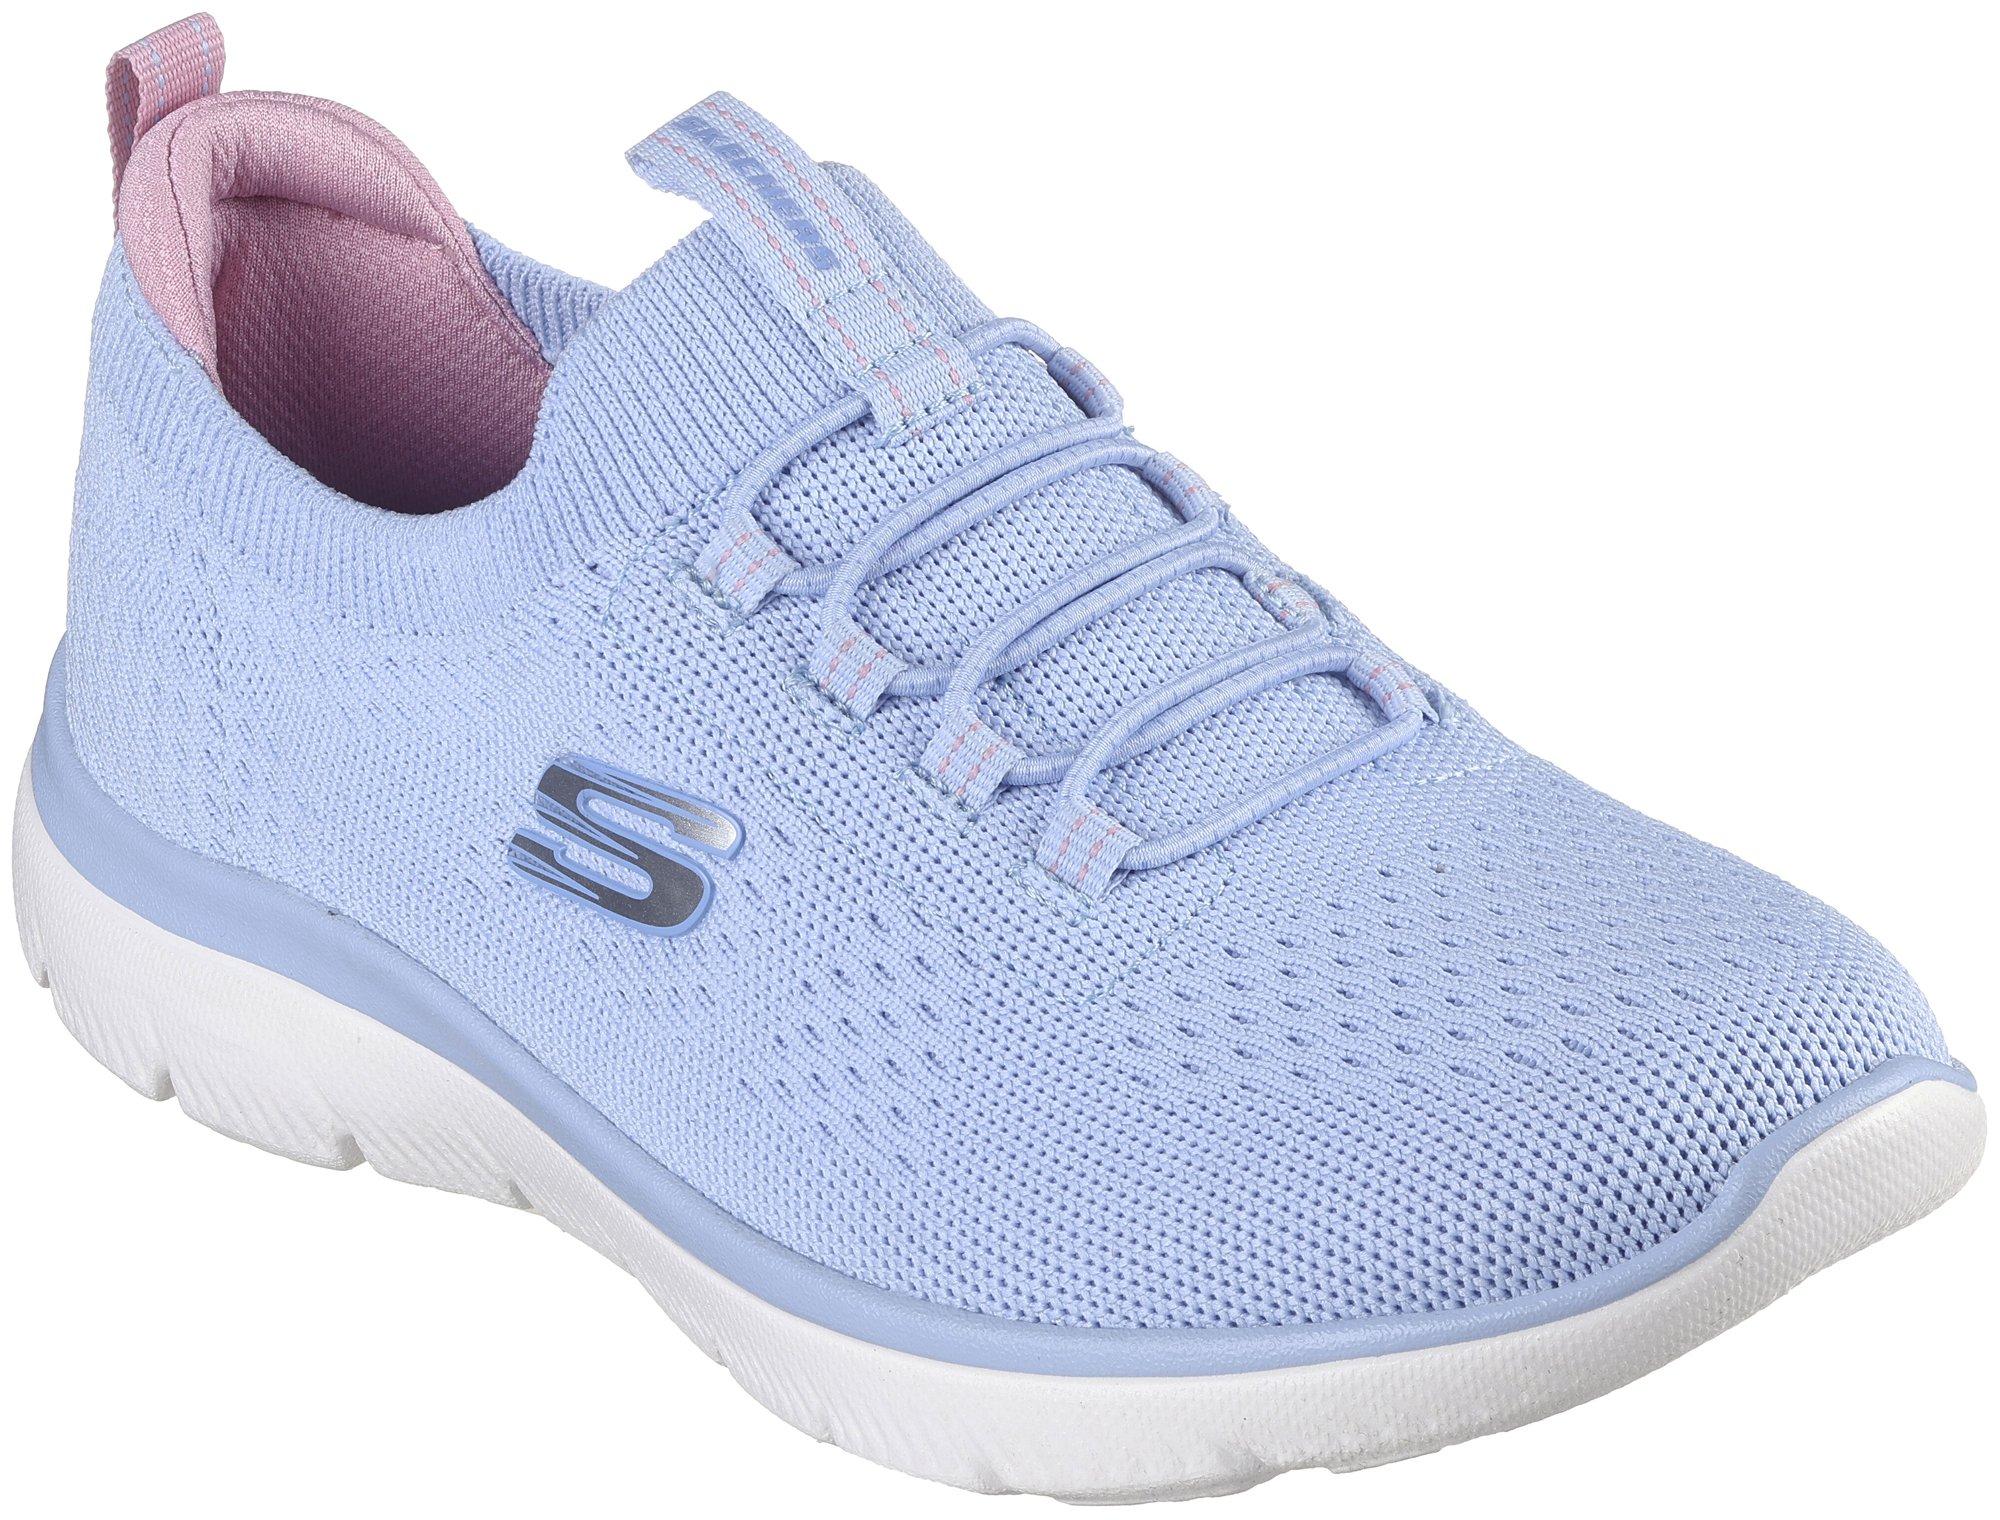 Skechers Womens Glide Step Breeze Athletic Shoes